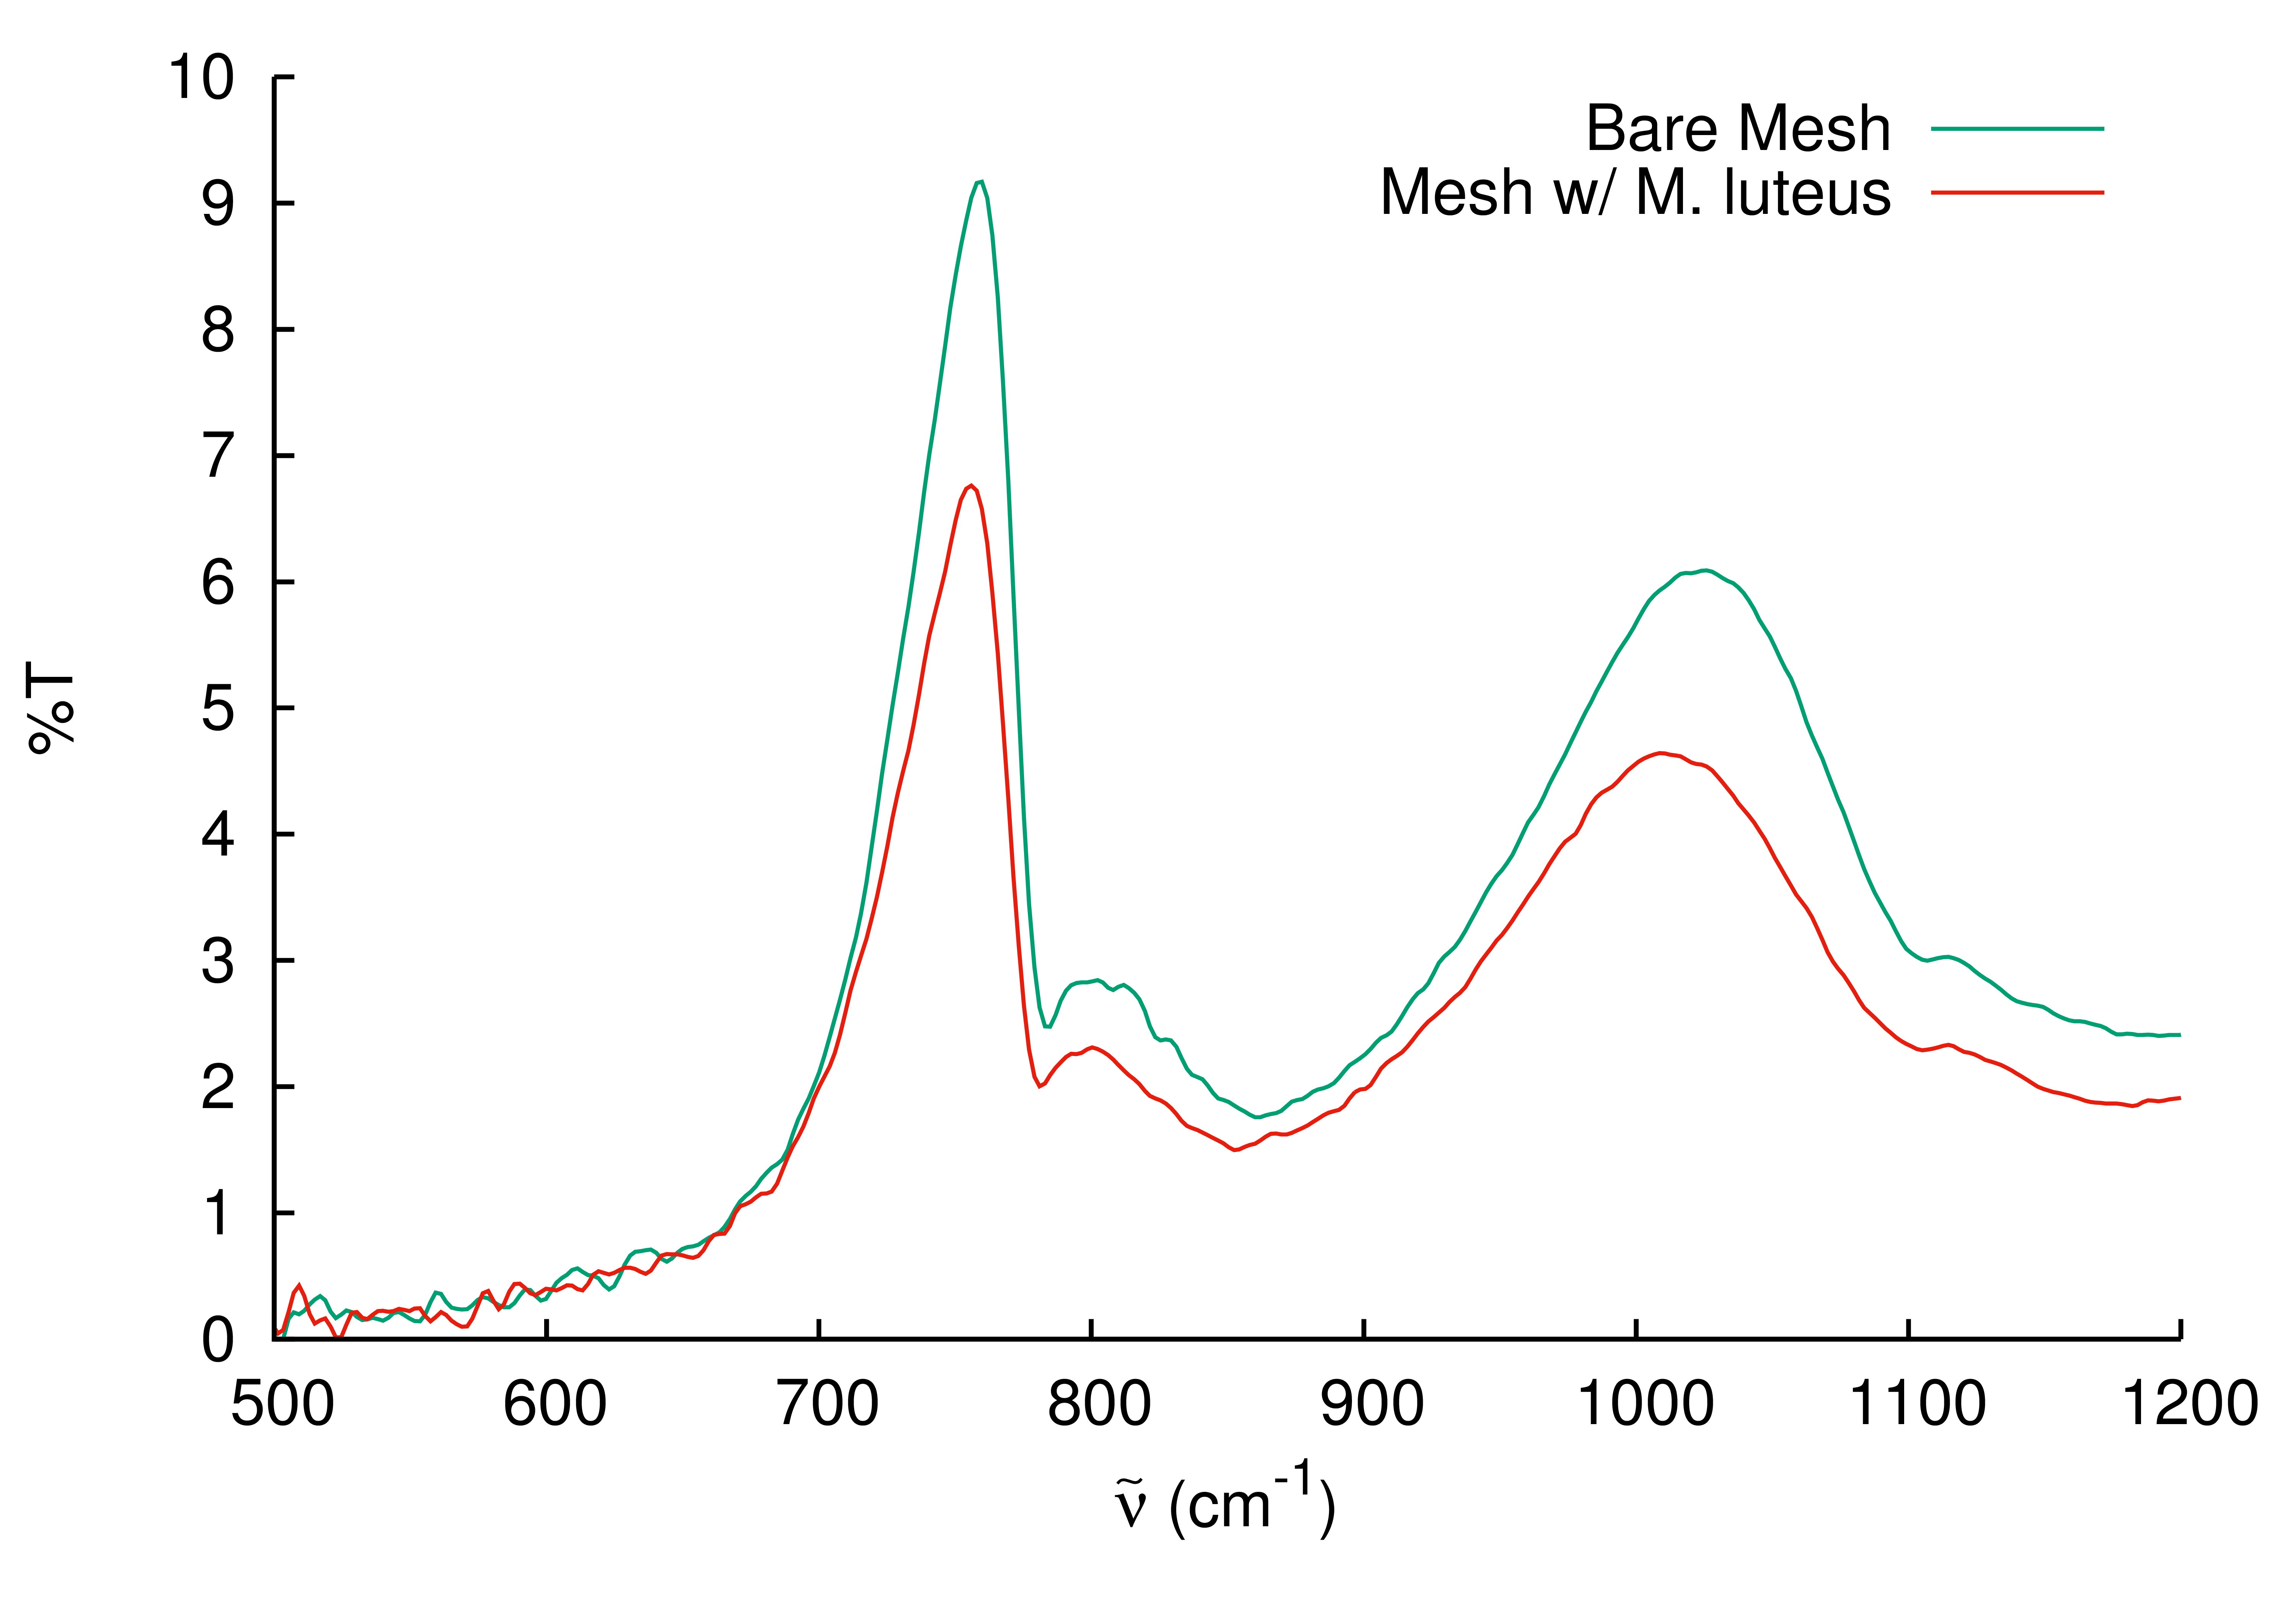 Transmission spectrum of a mesh with and without M. luteus zoomed in on the region from 500 - 1200 wavenumbers.